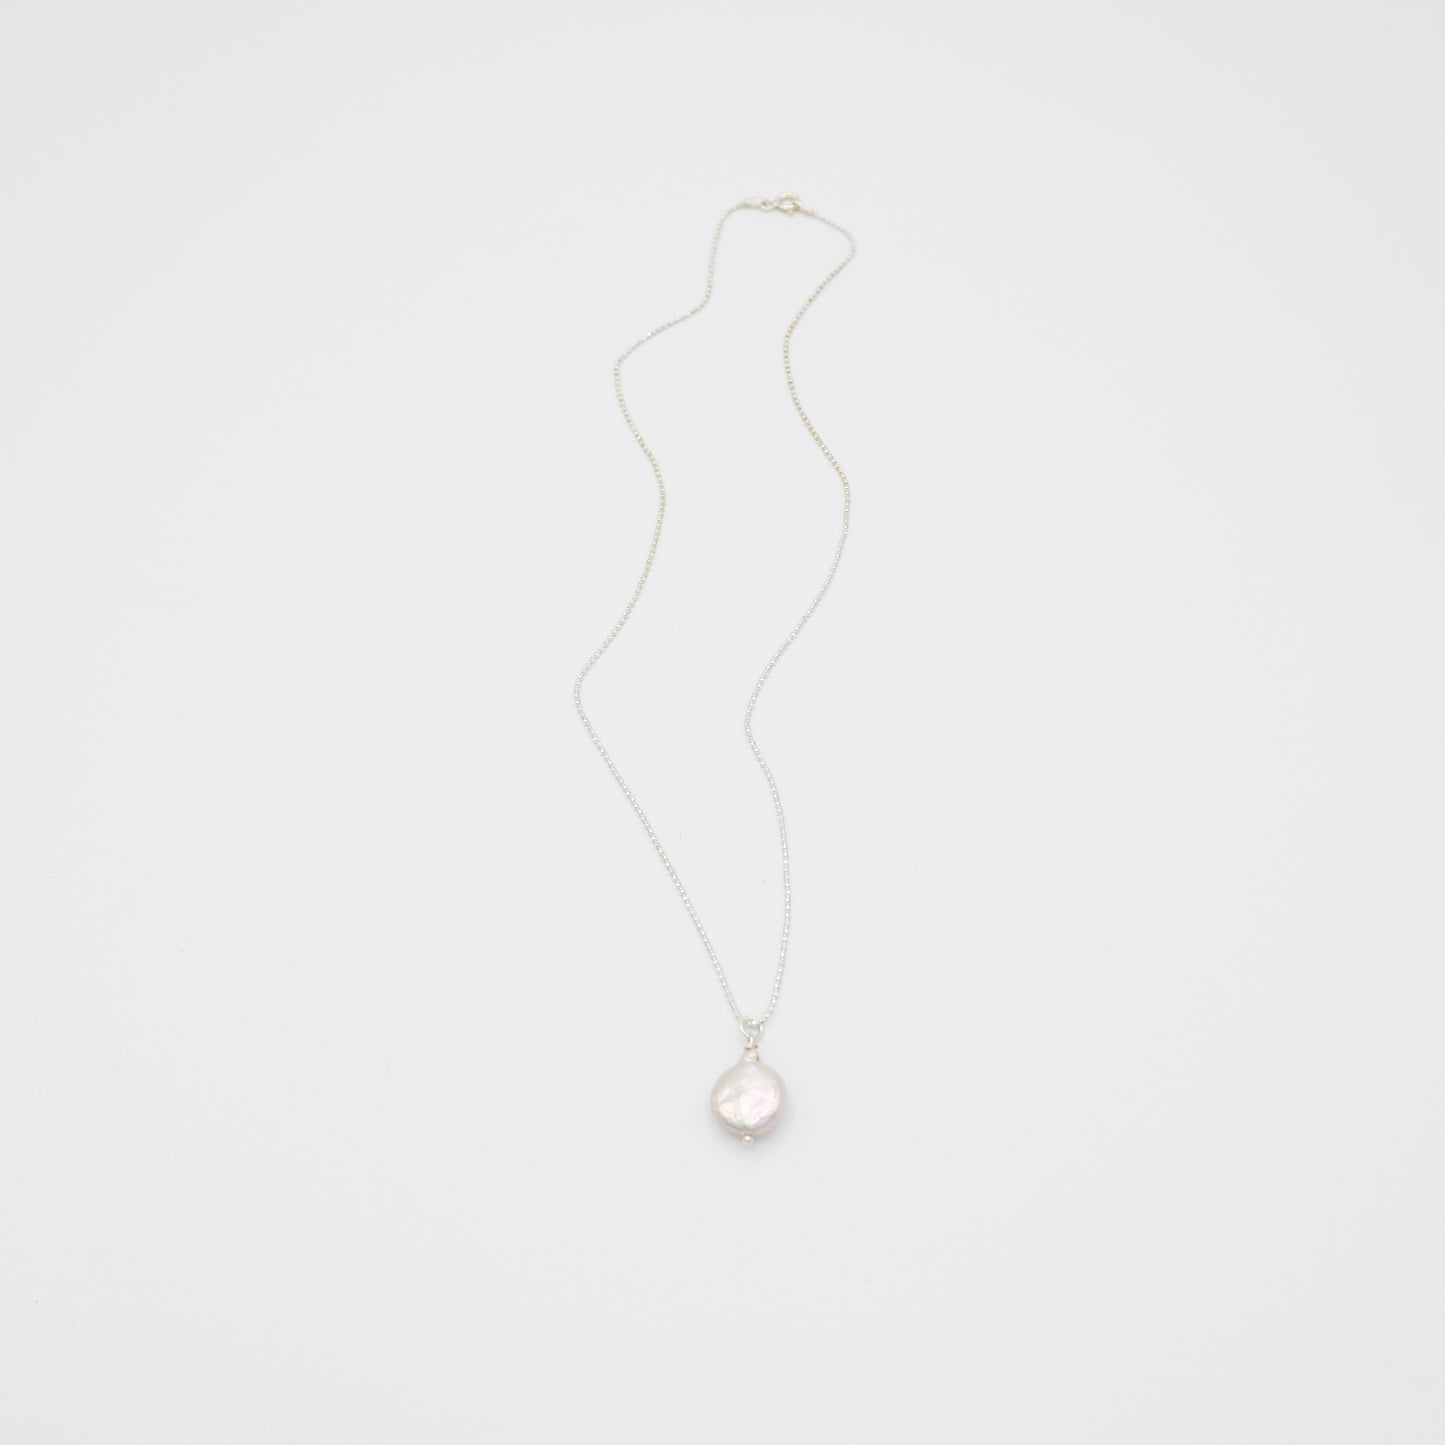 Roop Jewelry Sweet Pearl Necklace in Sterling Silver. Simple coin pearl necklace. Handmade pearl jewelry from Oakland, Ca.